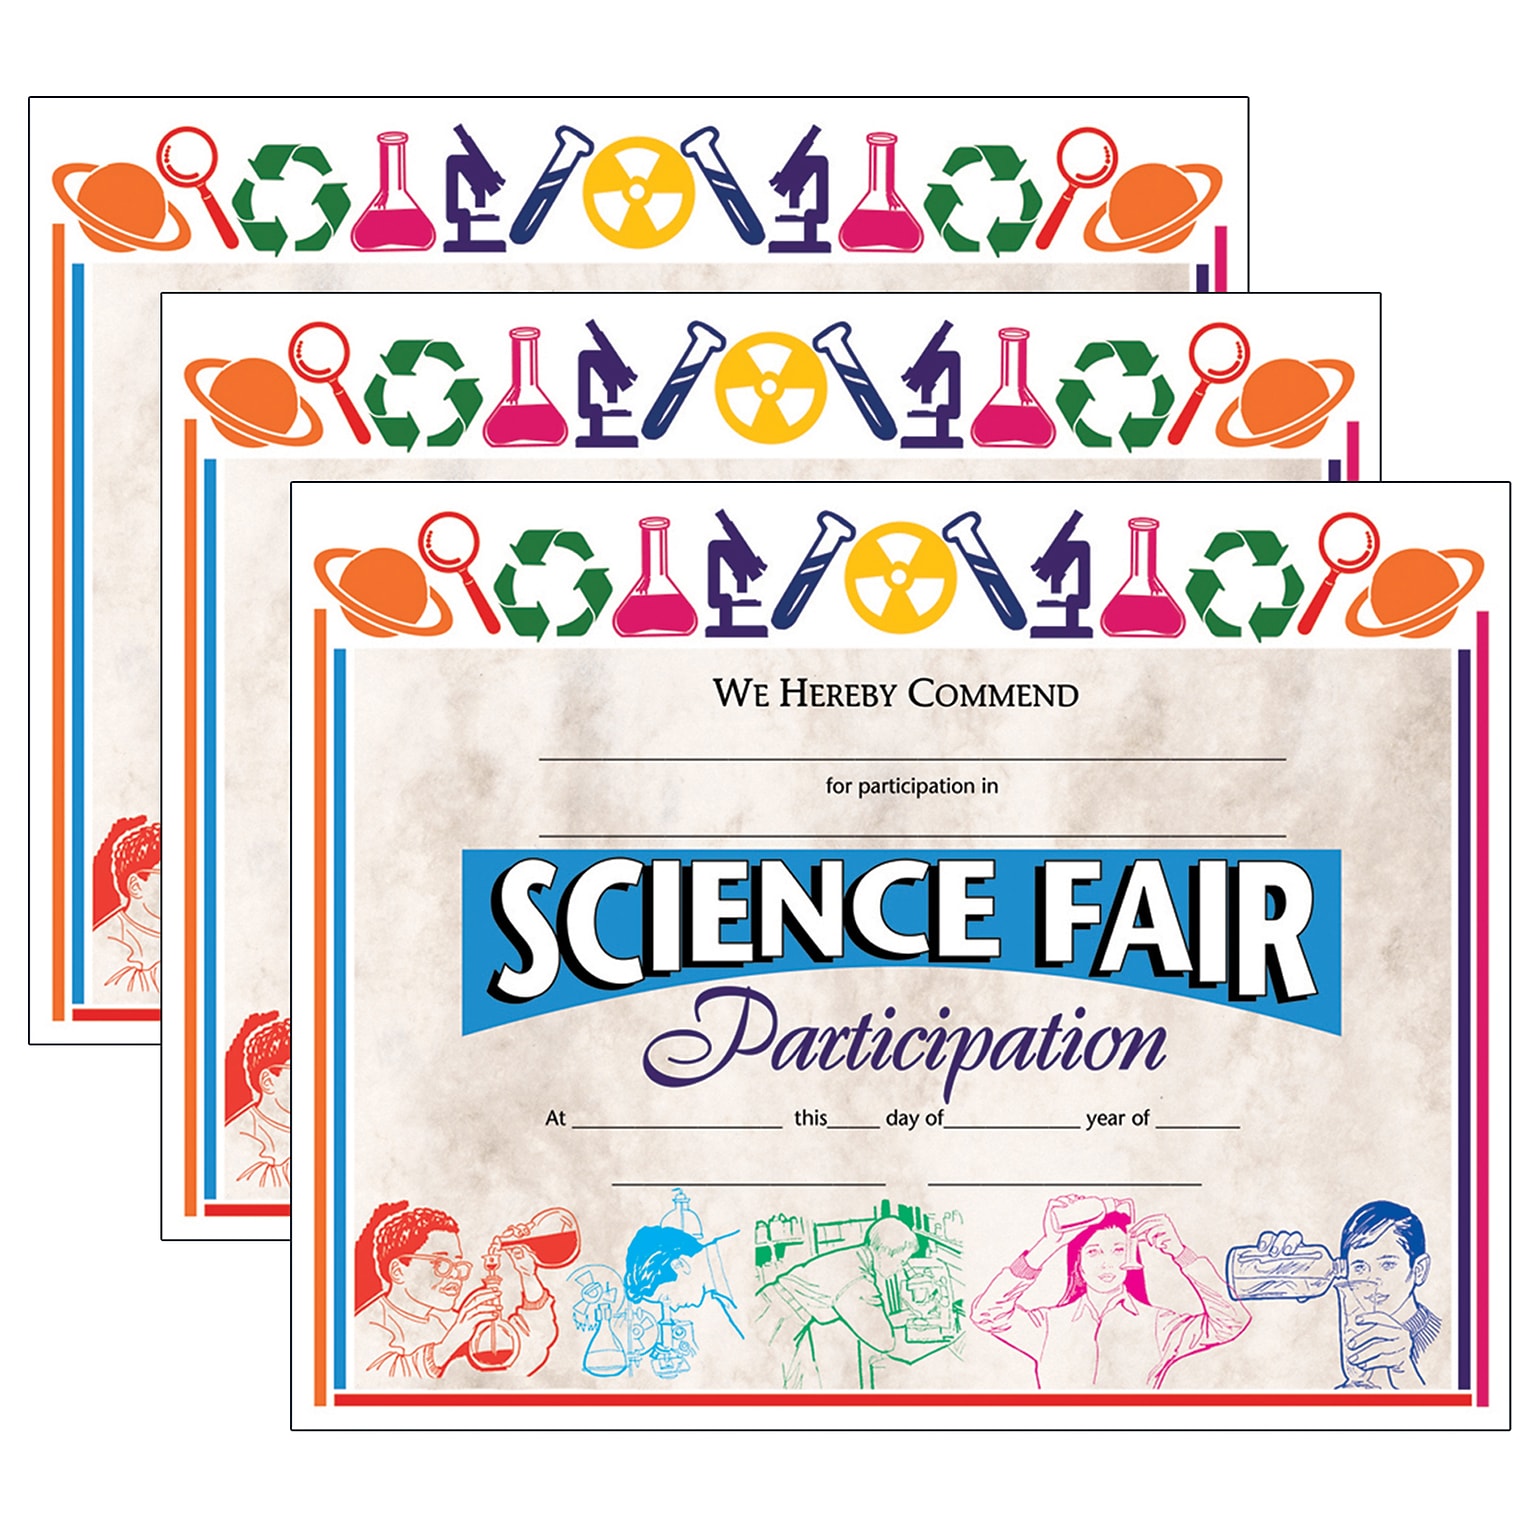 Hayes Publishing 8.5 x 11 Science Fair Participation Award, Multicolored, 30 Per Pack, 3 Packs (H-VA572-3)